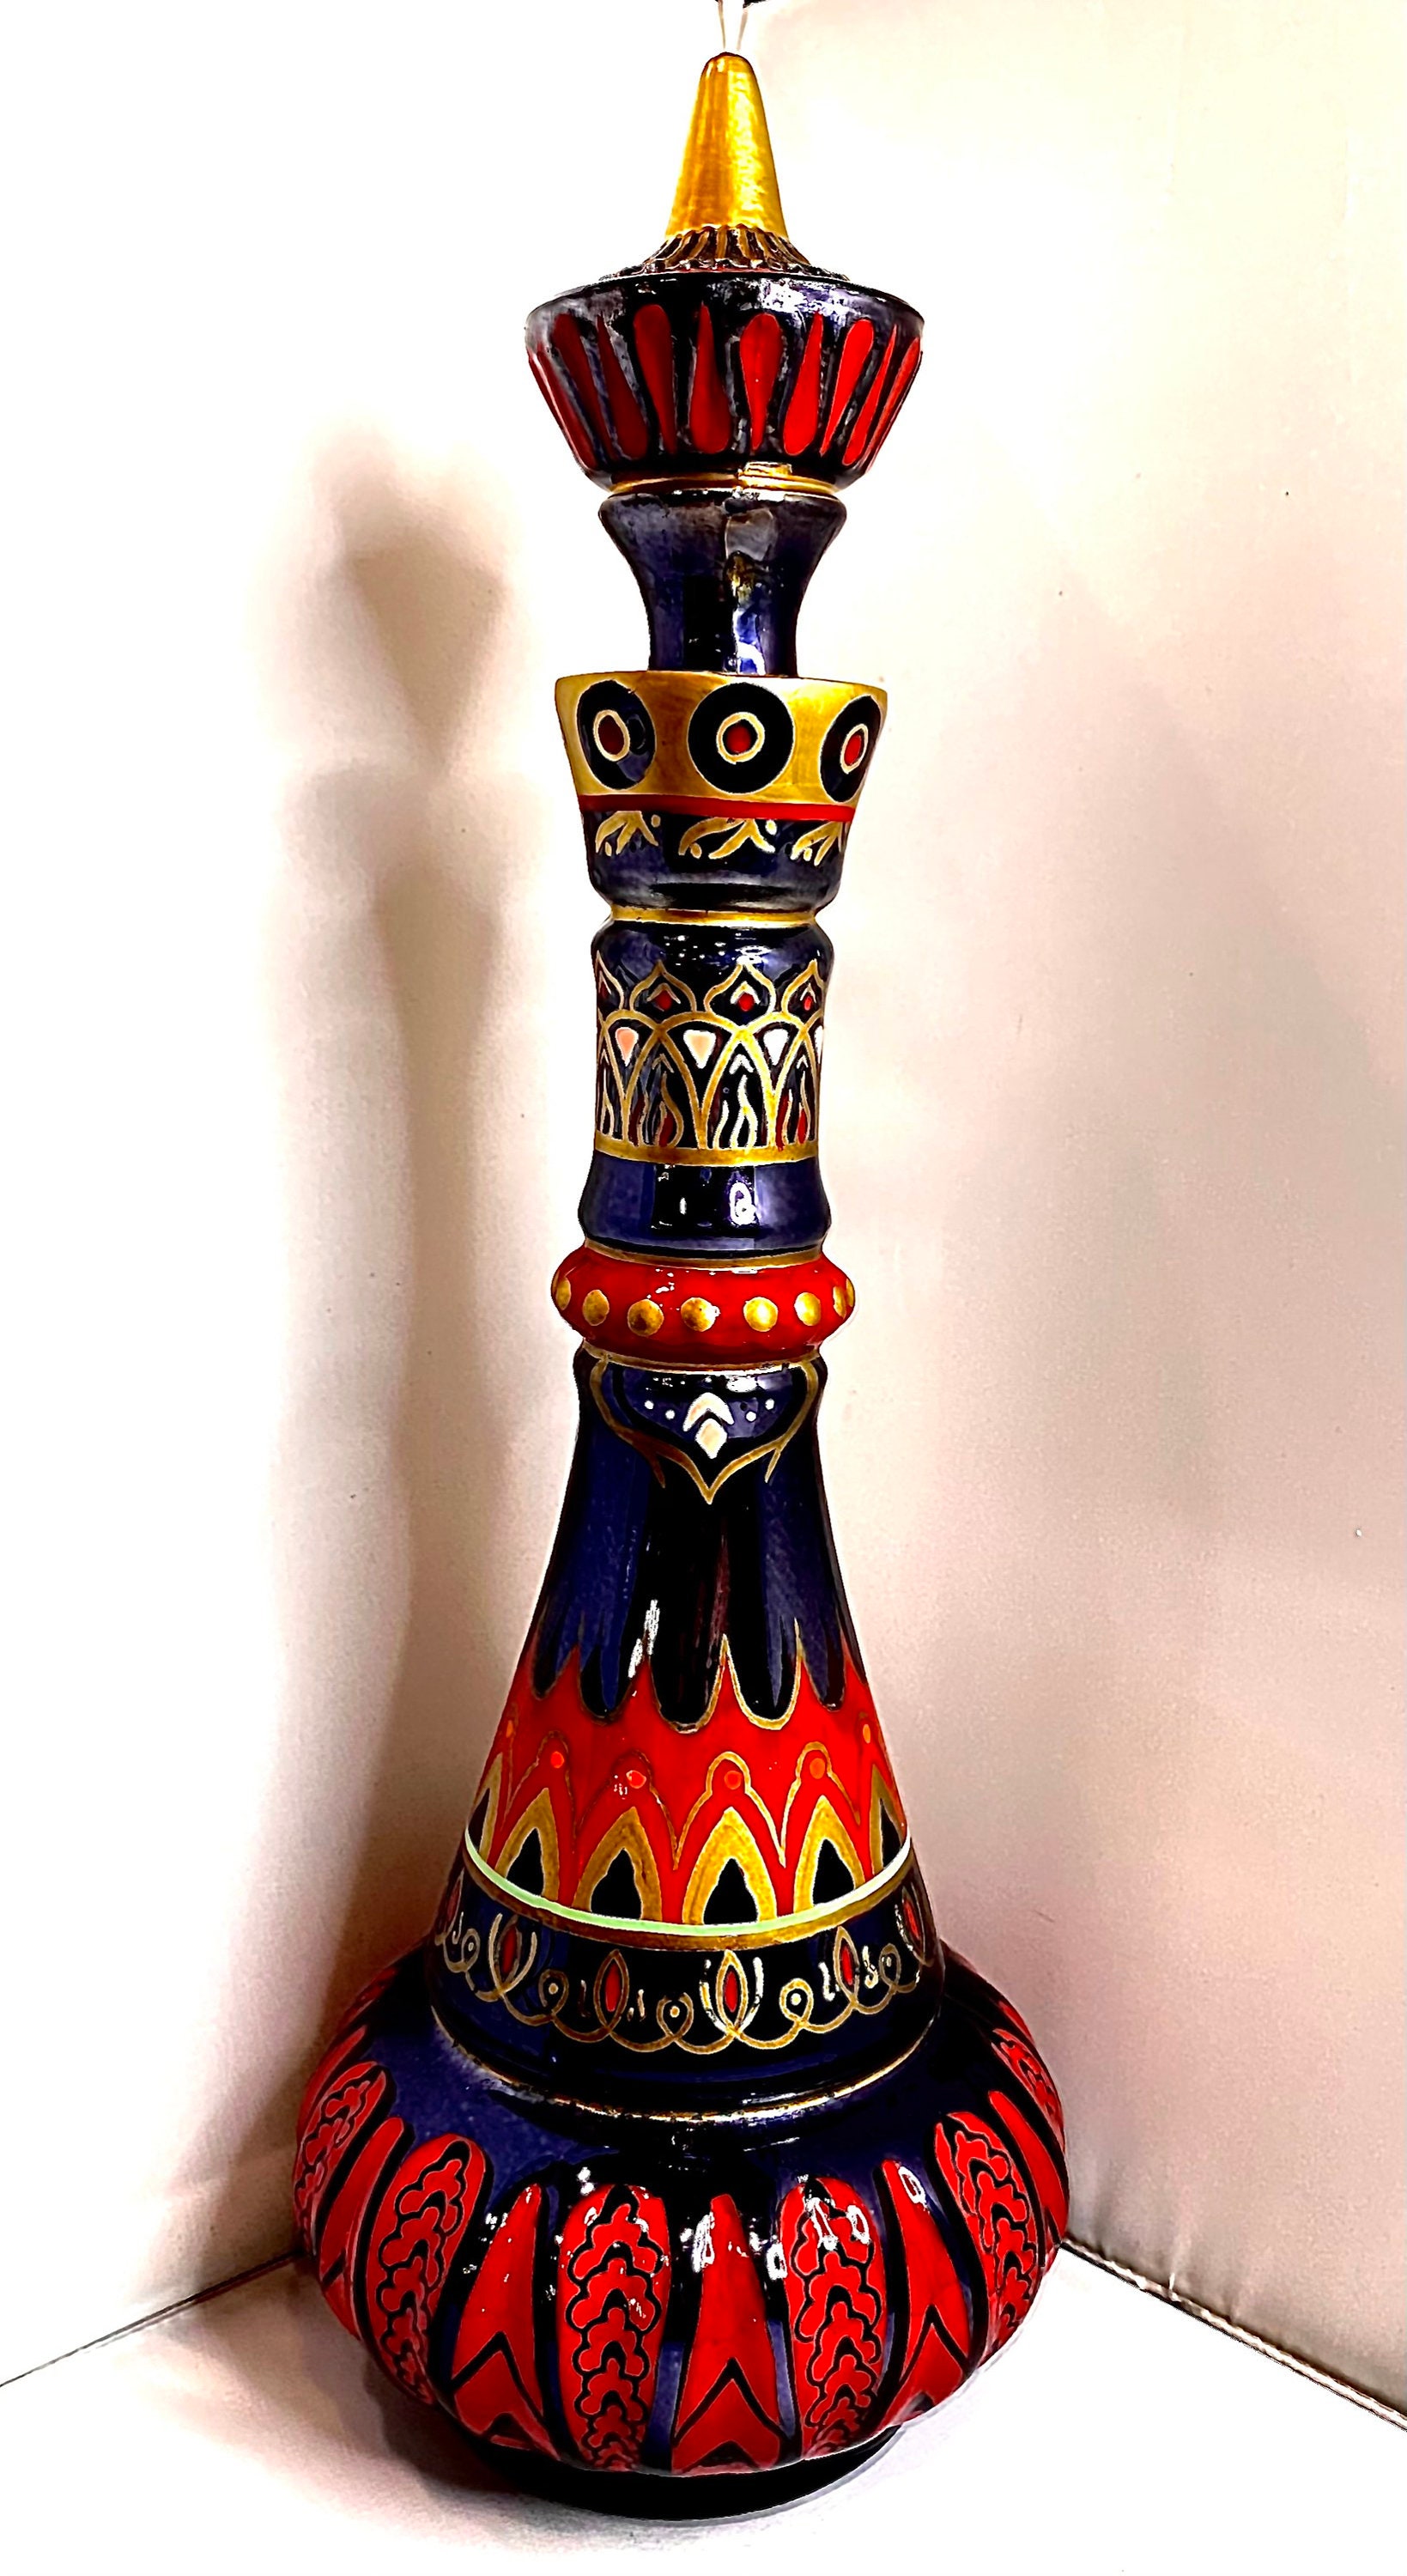 Jeannie's bottle on 'I Dream of Jeannie' was a limited edition Jim Beam  bourbon decanter